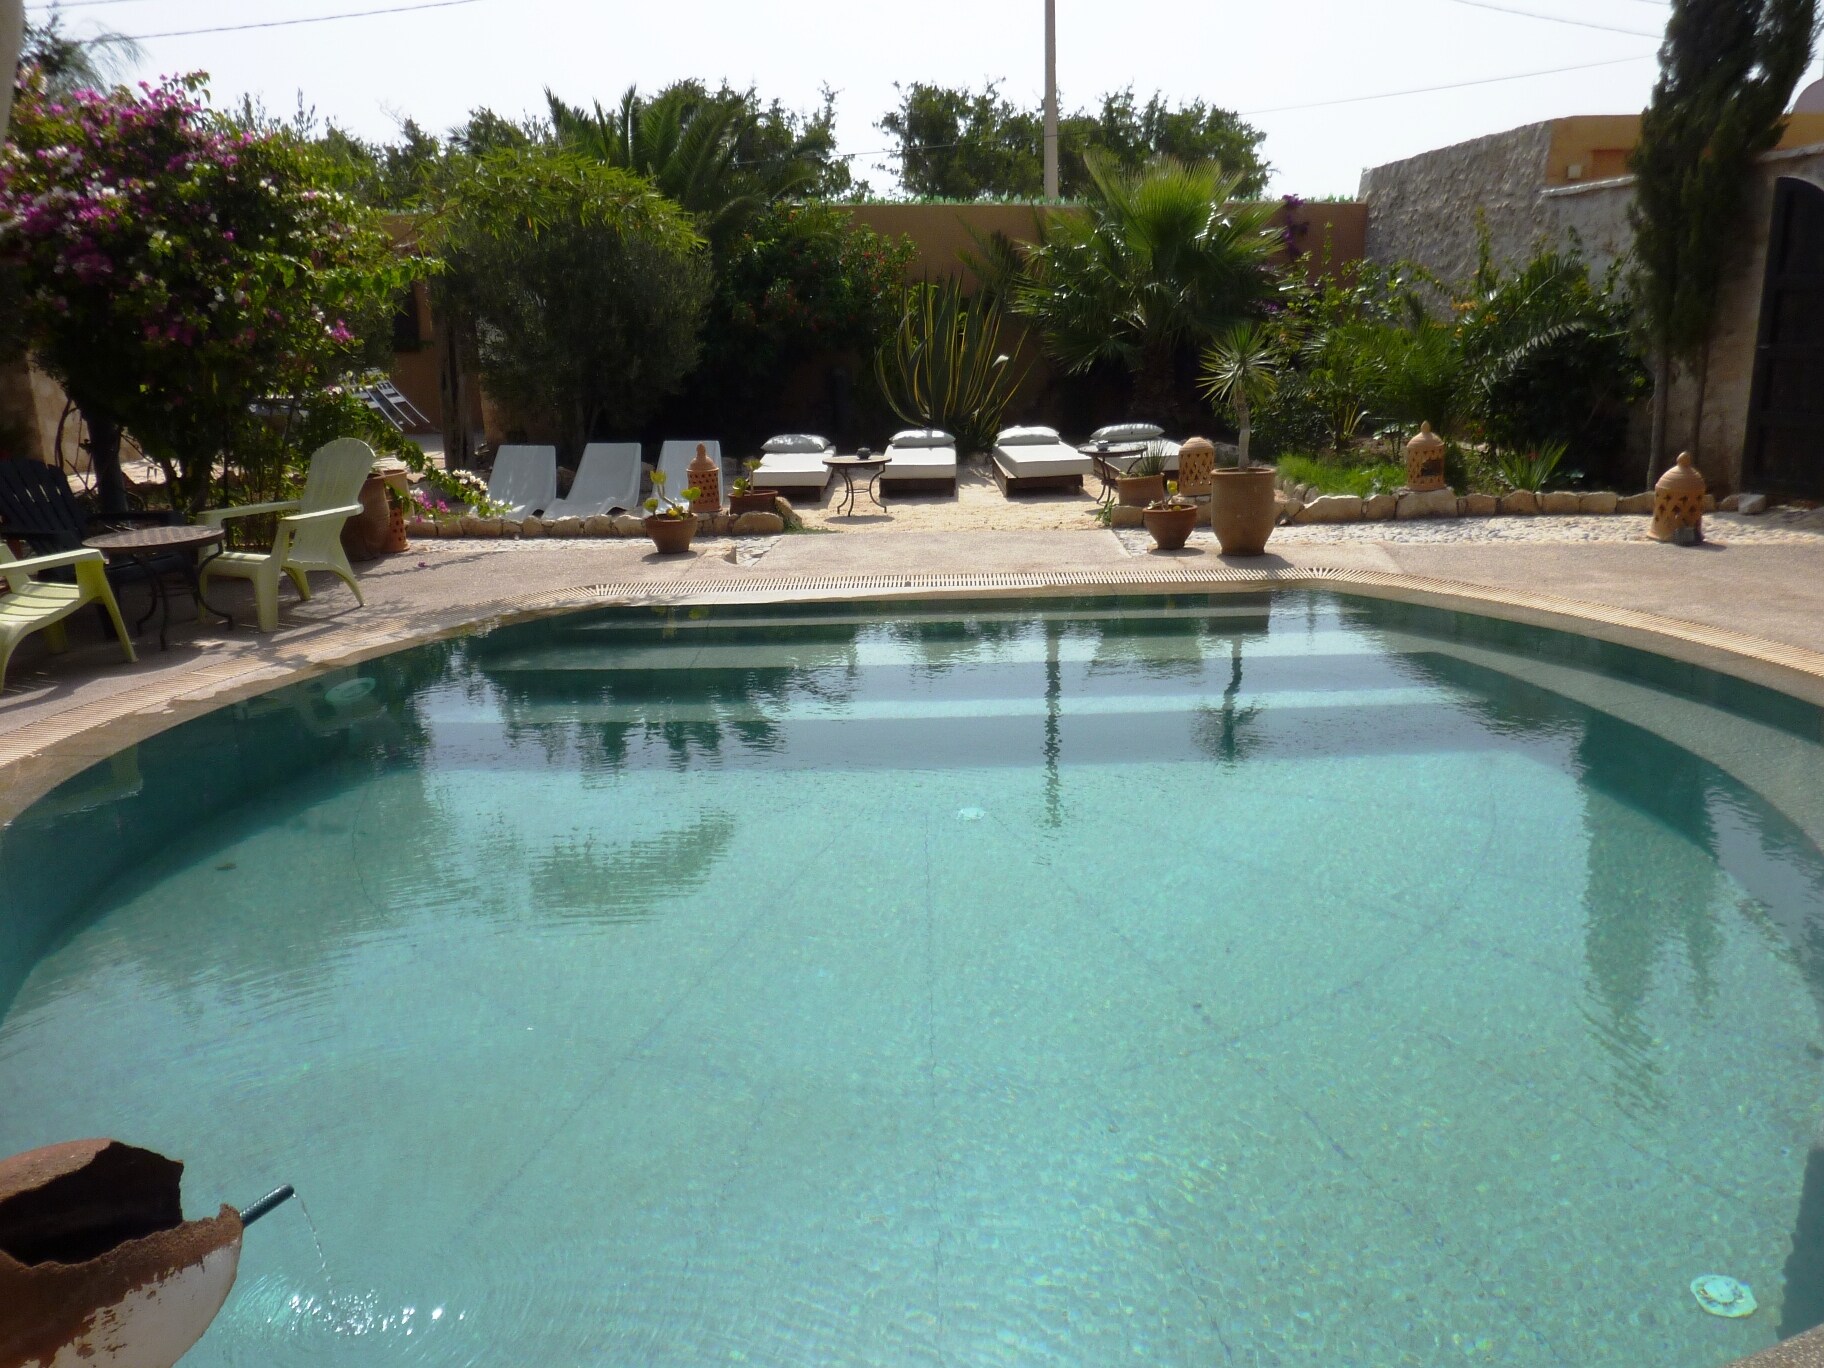 Property Image 2 - Double bedroom and spacious garden with swimming pool